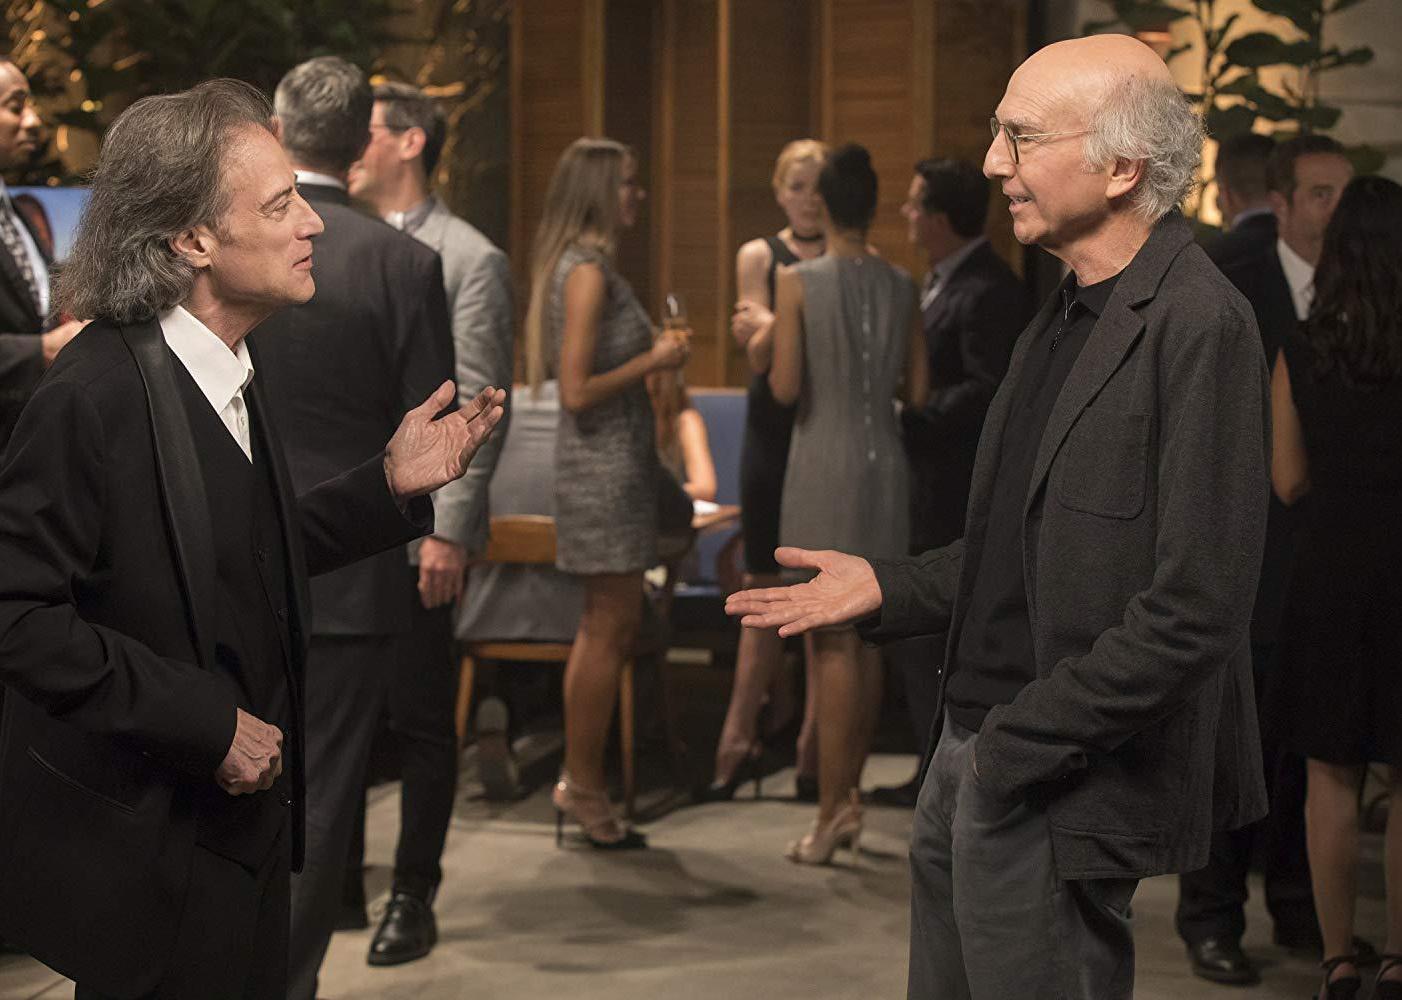 Actors in a scene from ‘Curb Your Enthusiasm’.